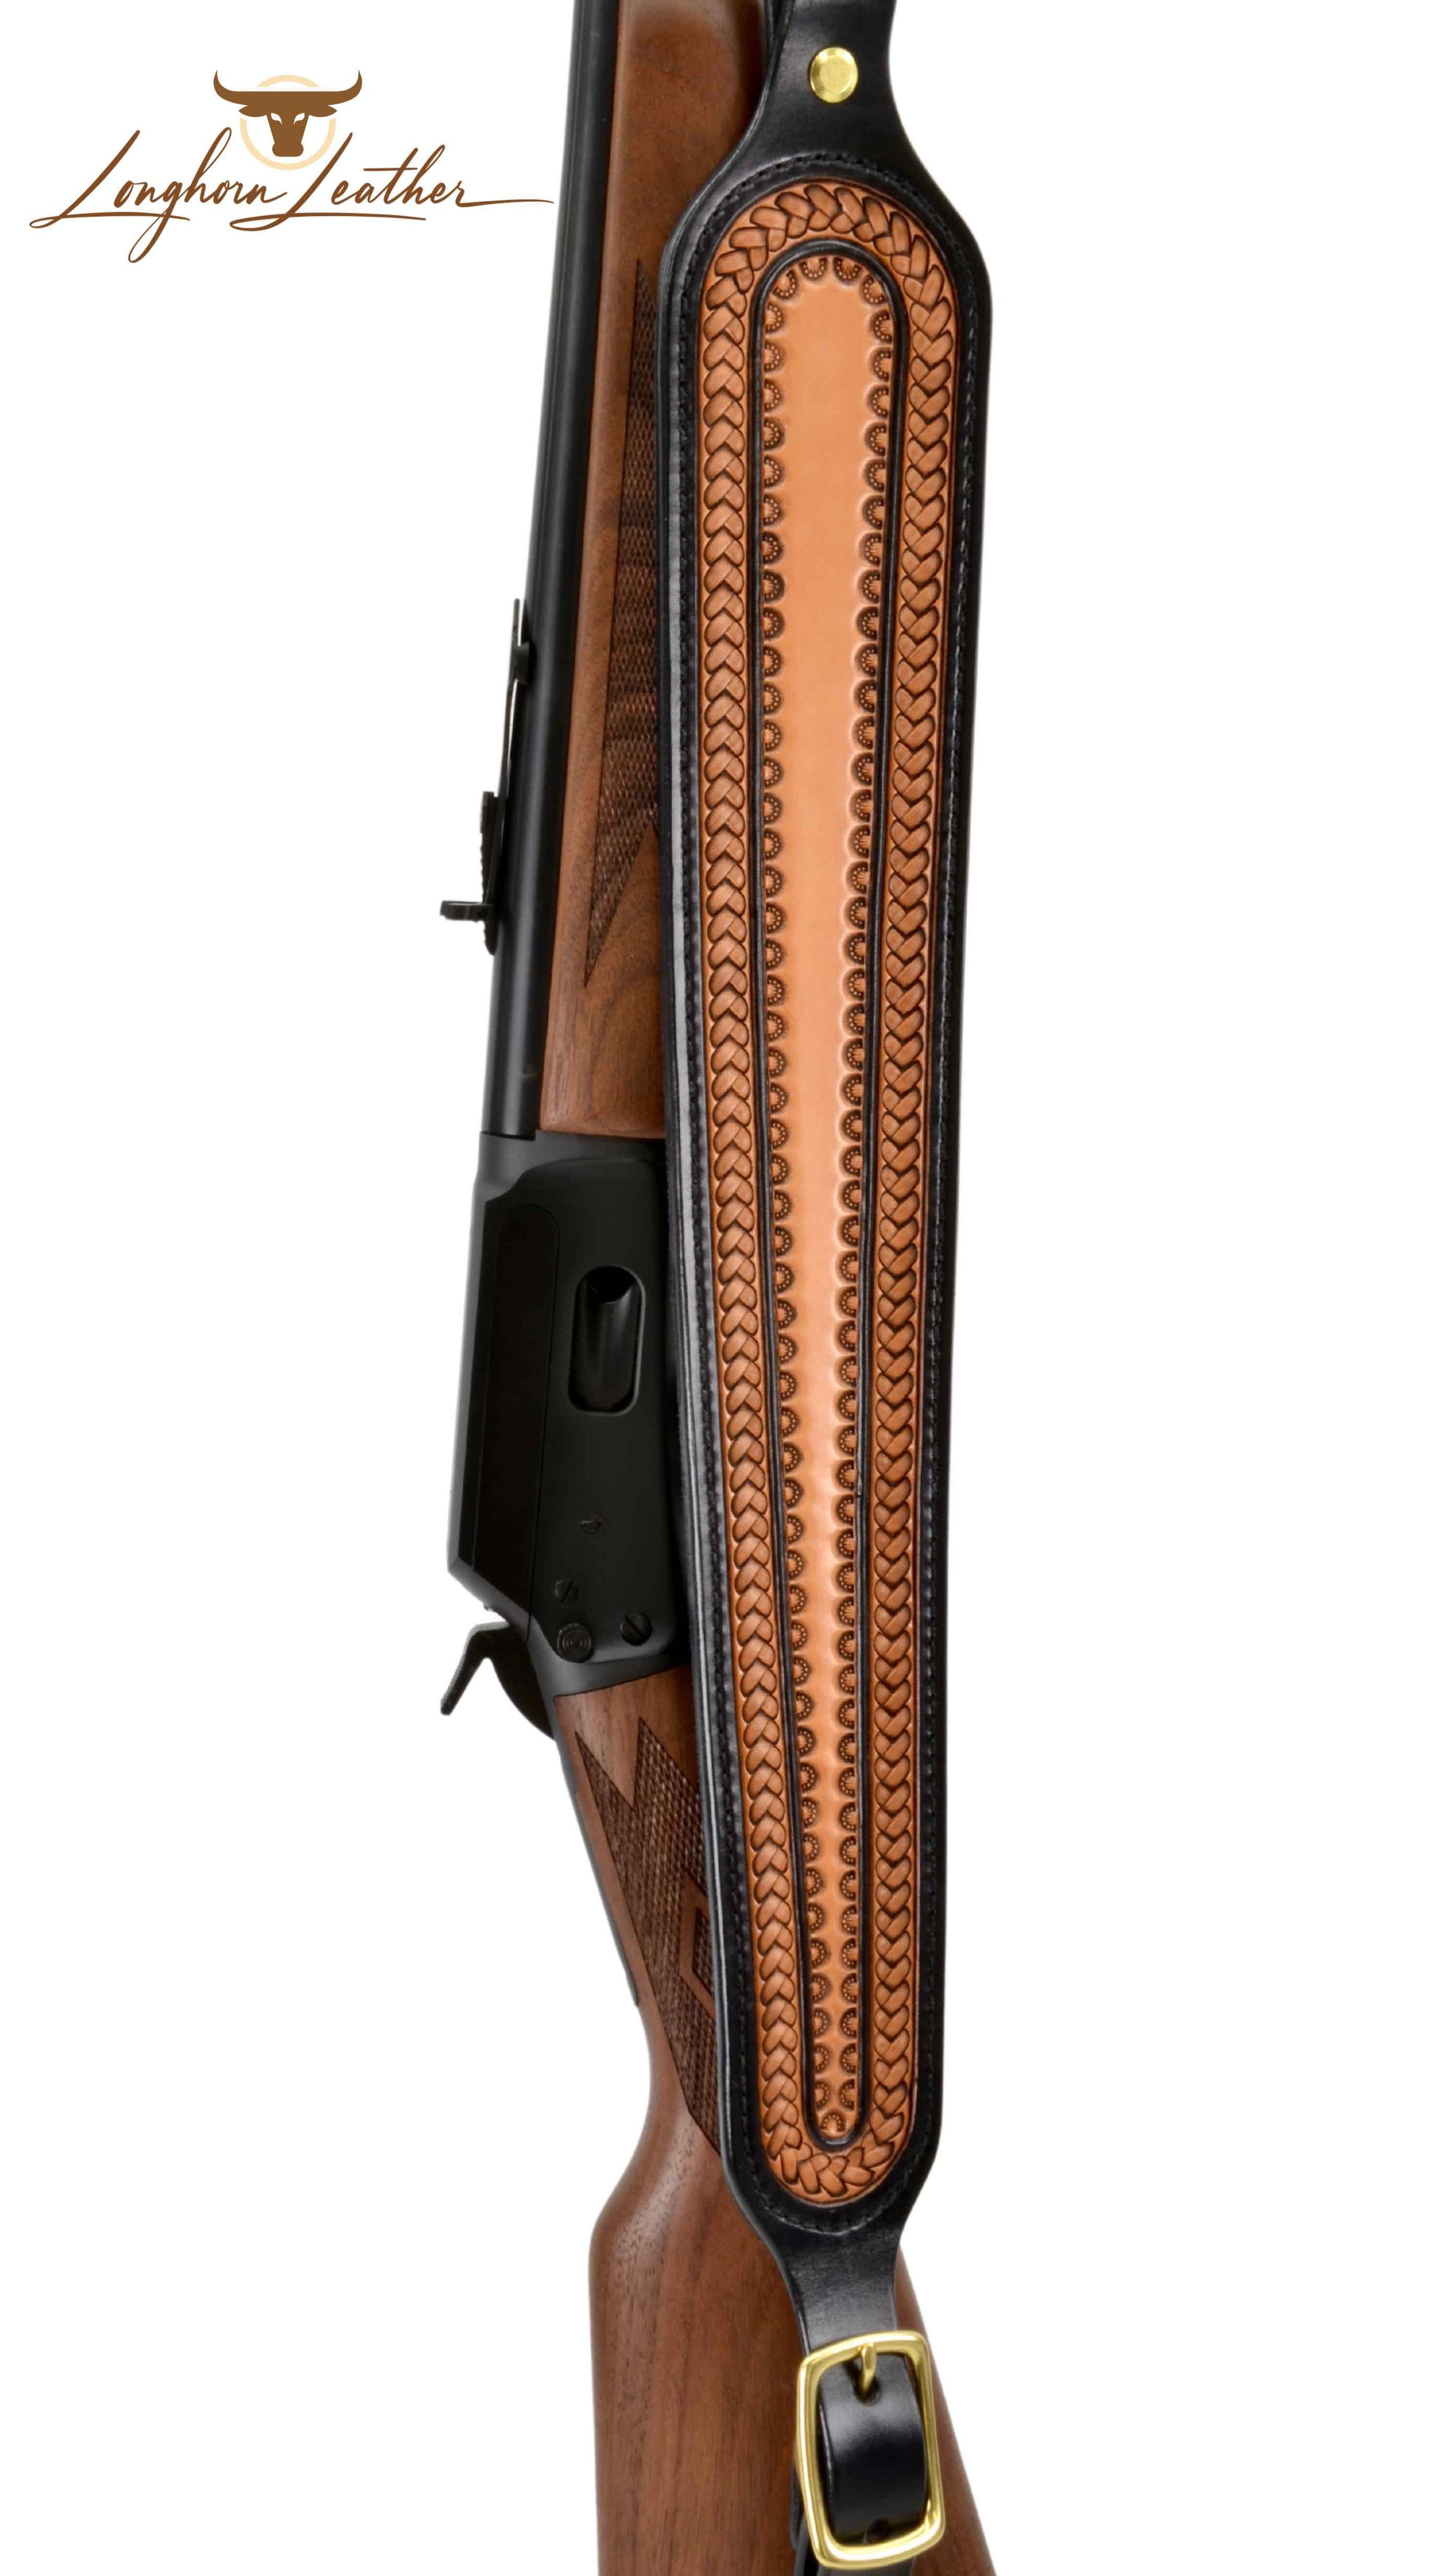 Custom leather rifle sling featuring the Sedona design.  Individually handcrafted at Longhorn Leather AZ